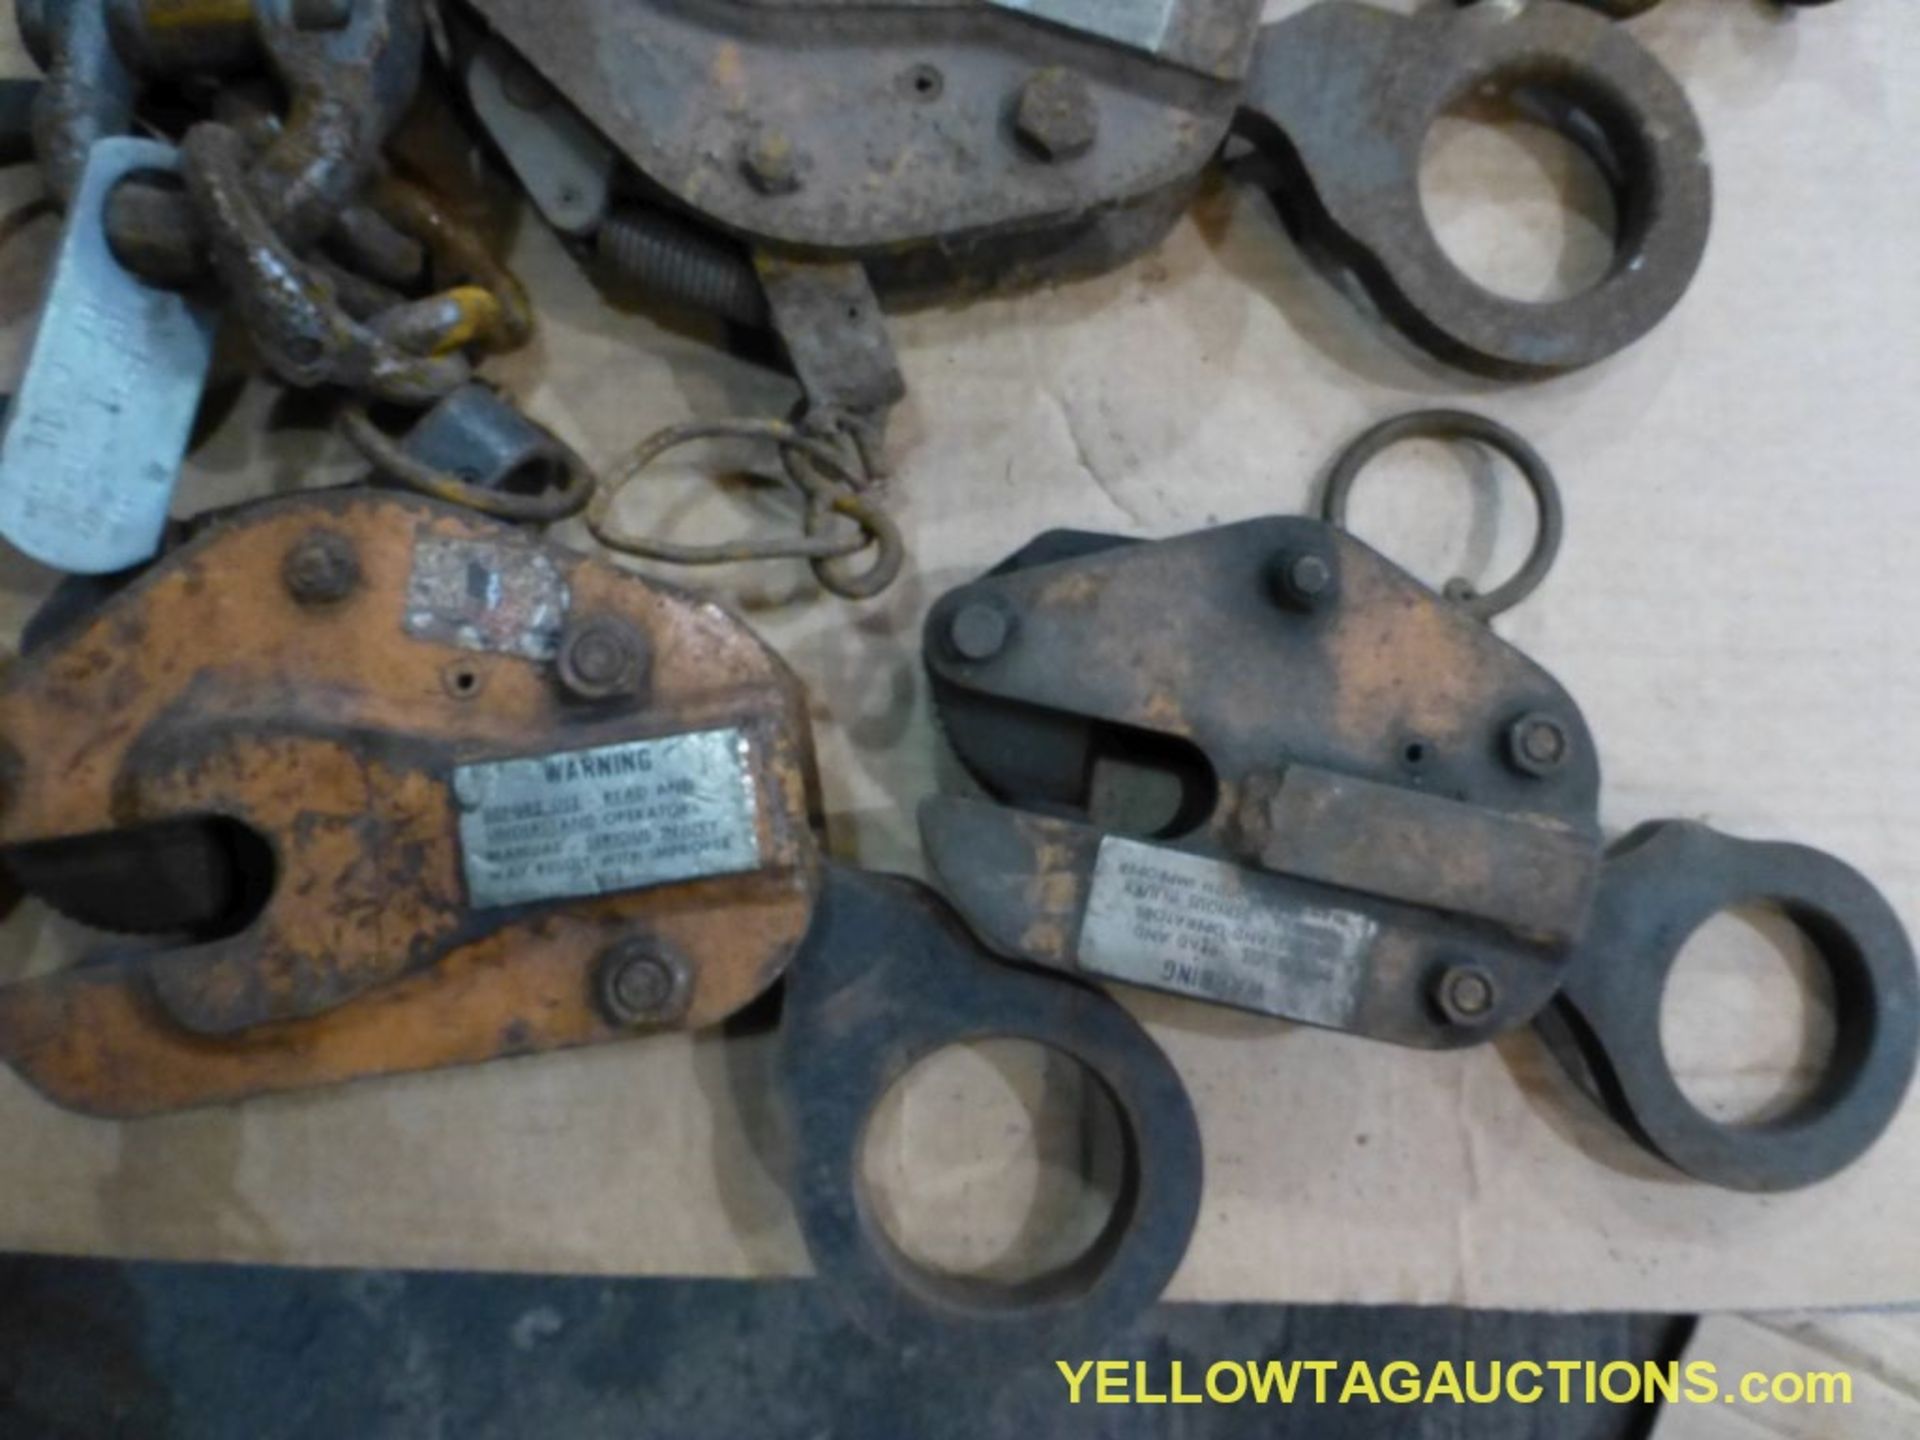 Lot of Assorted Lifting Clamps and Chain Slings - Image 2 of 6